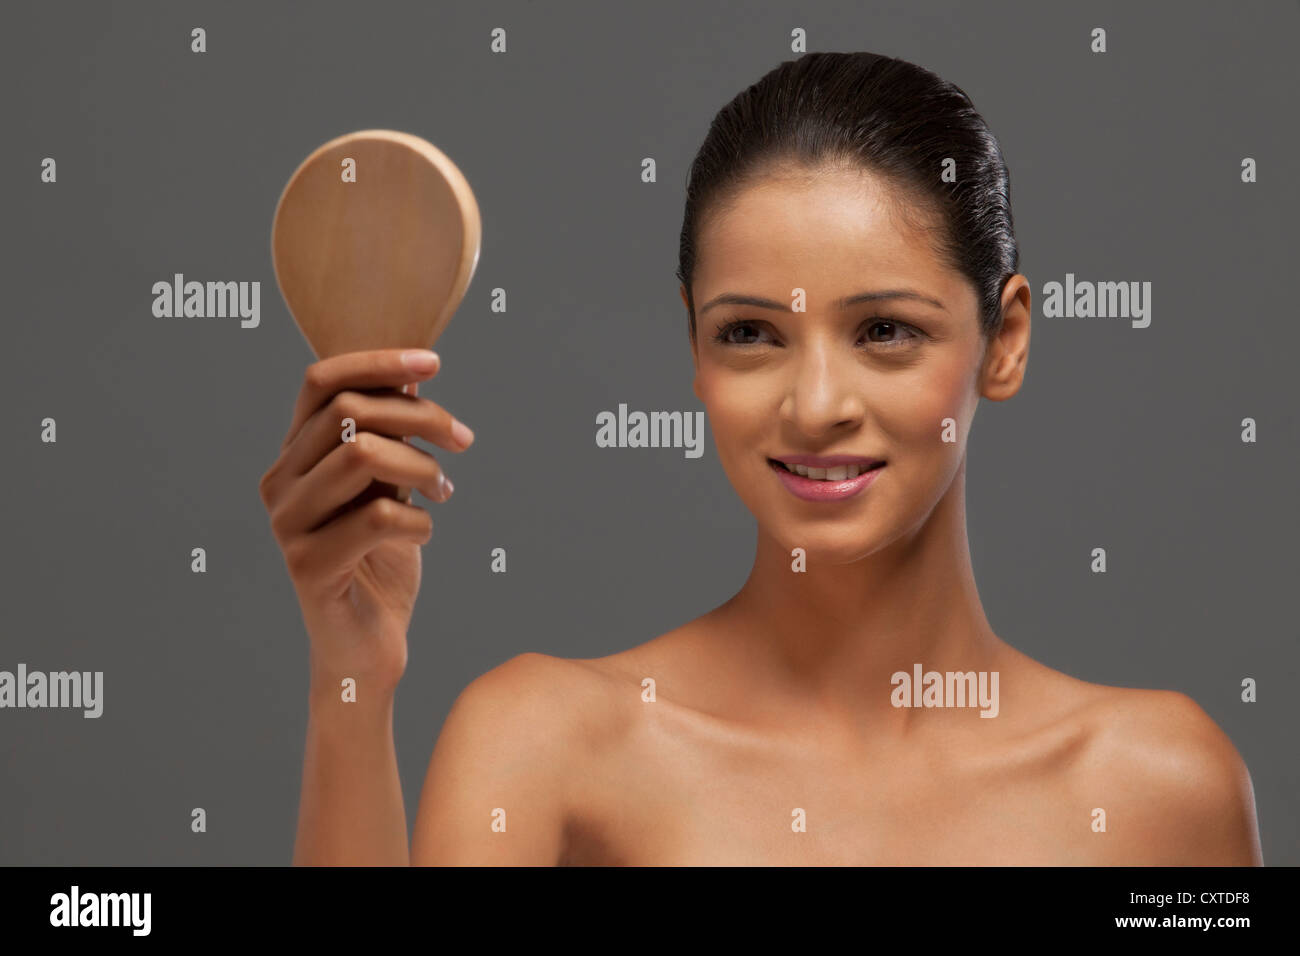 Close-up of beautiful young woman looking at hand mirror Banque D'Images